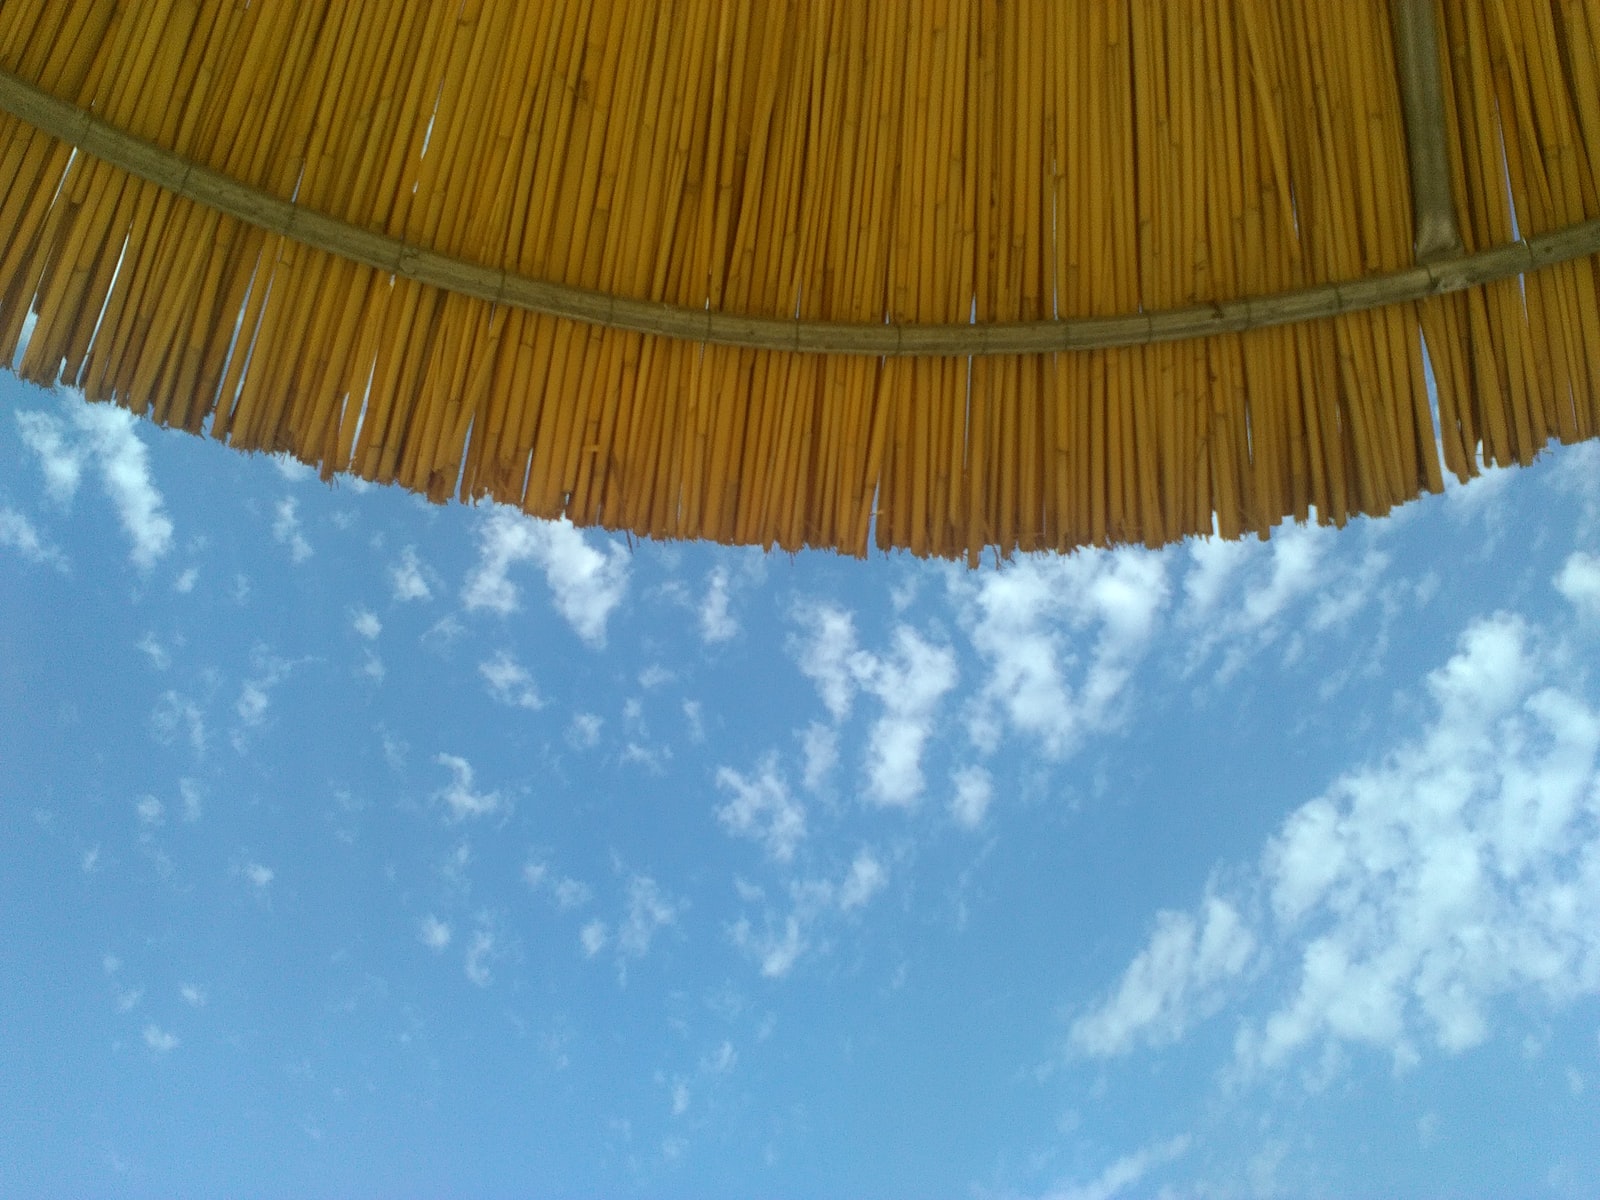 brown woven umbrella under blue sky and white clouds during daytime